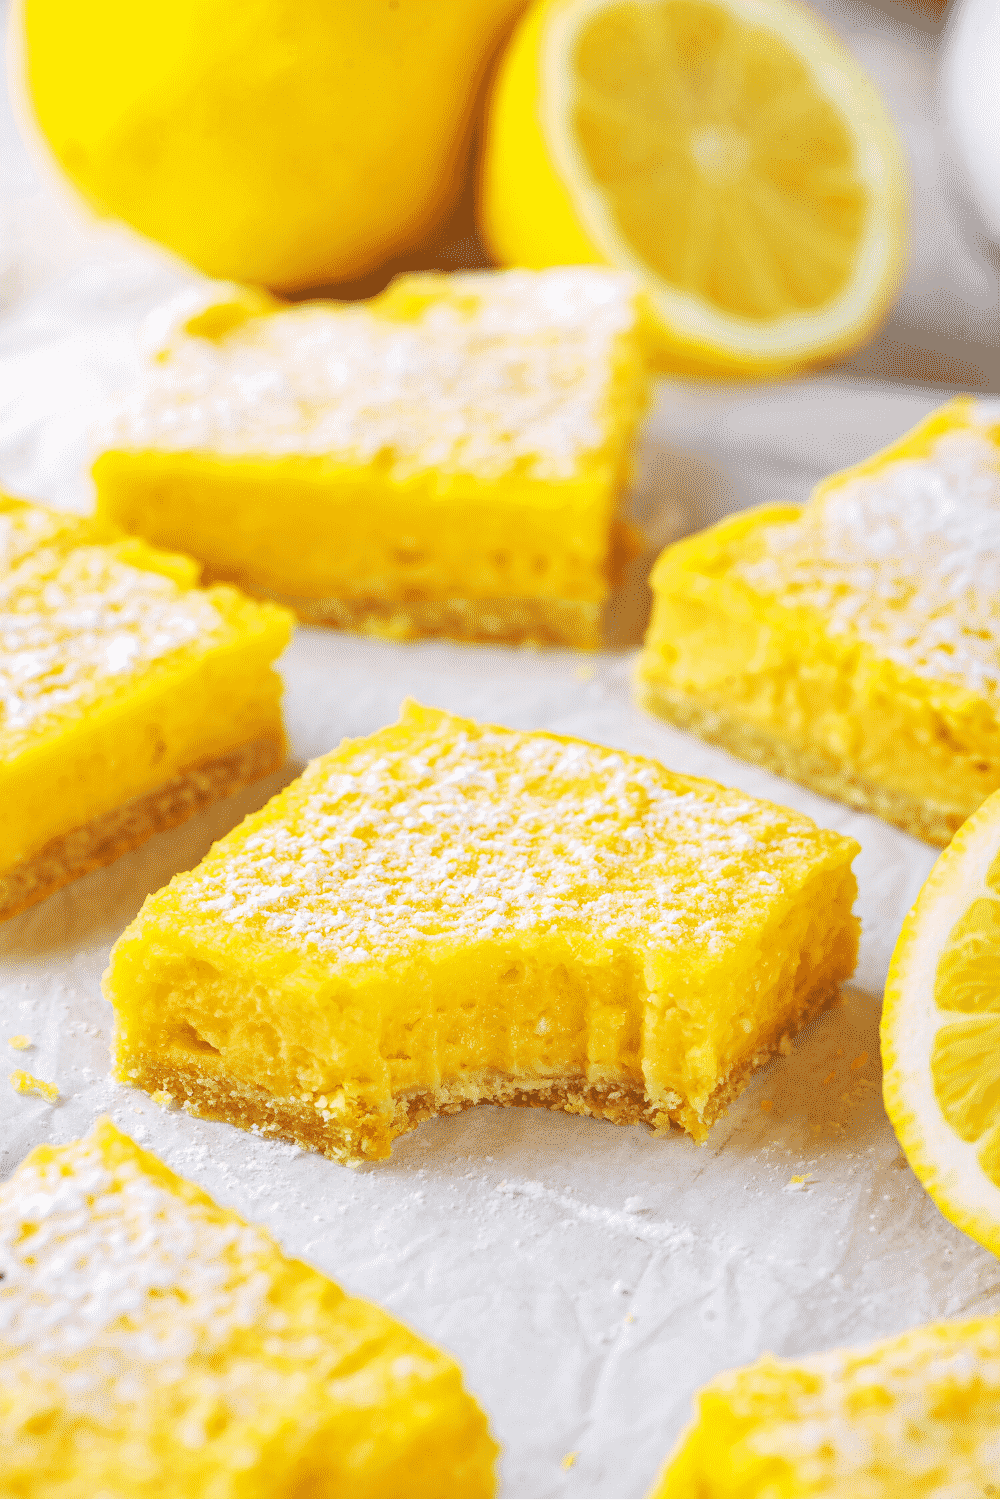 A few lemon bars on white parchment paper. The lemon bar in the middle has a bite out of the front. There are some lemons in the behind the lemon bars.